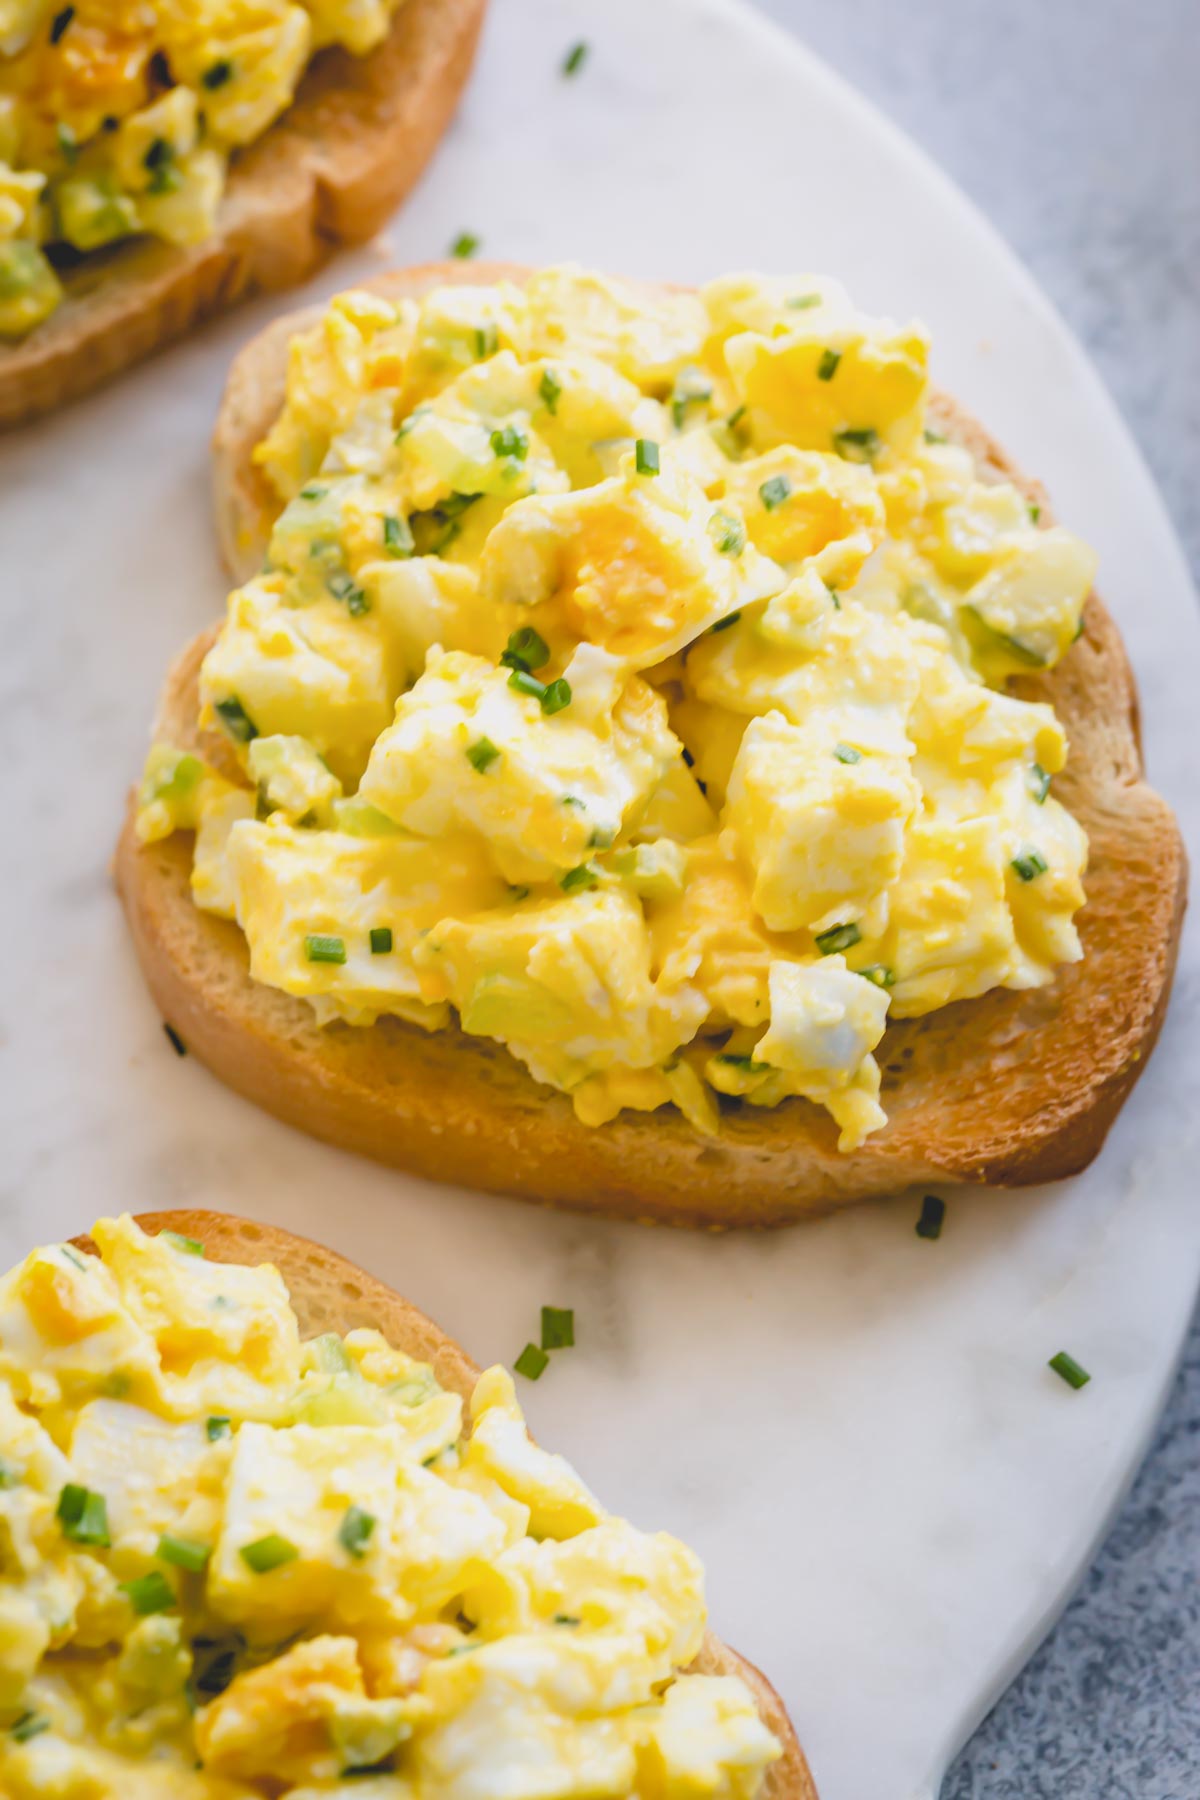 Egg salad on a toast and garnished with chopped chives.